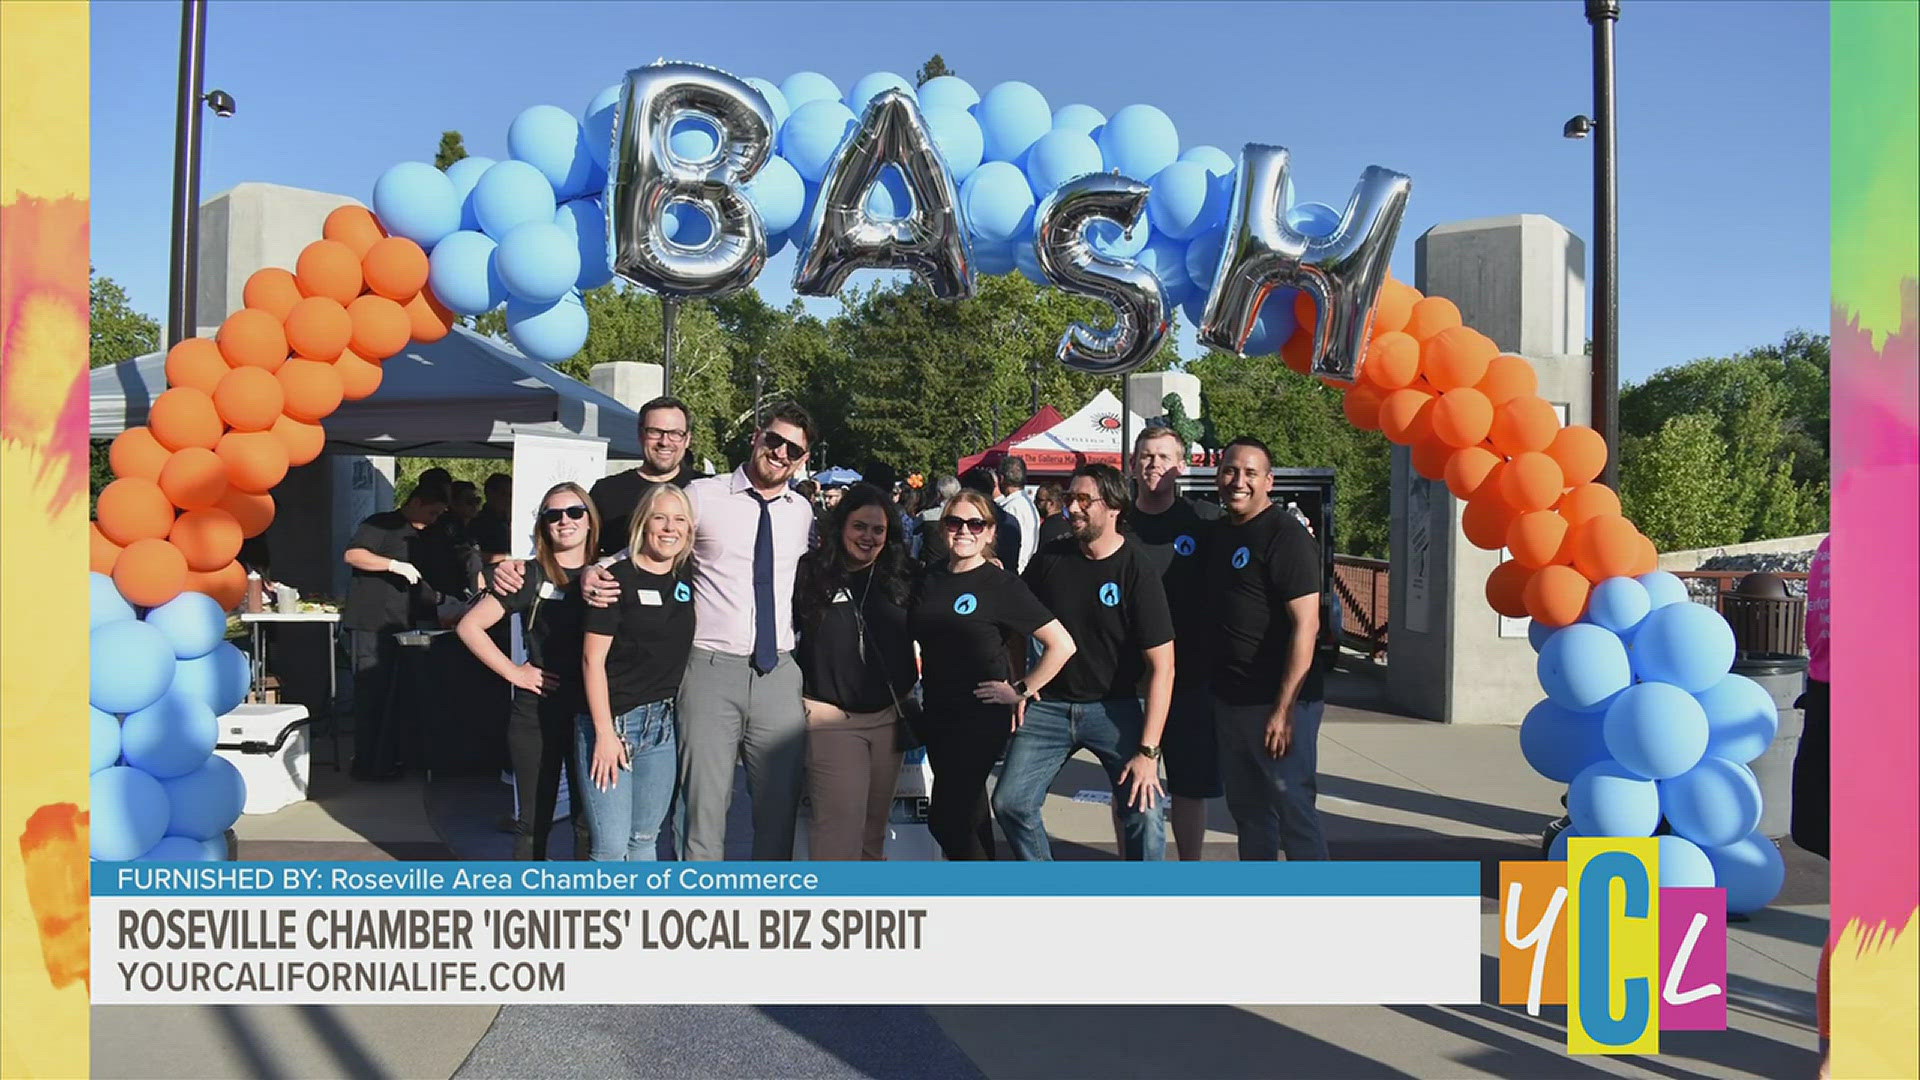 The Bash returns for another year, hosted by the Roseville Area Chamber of Commerce. Find out what this exciting local event will hold.